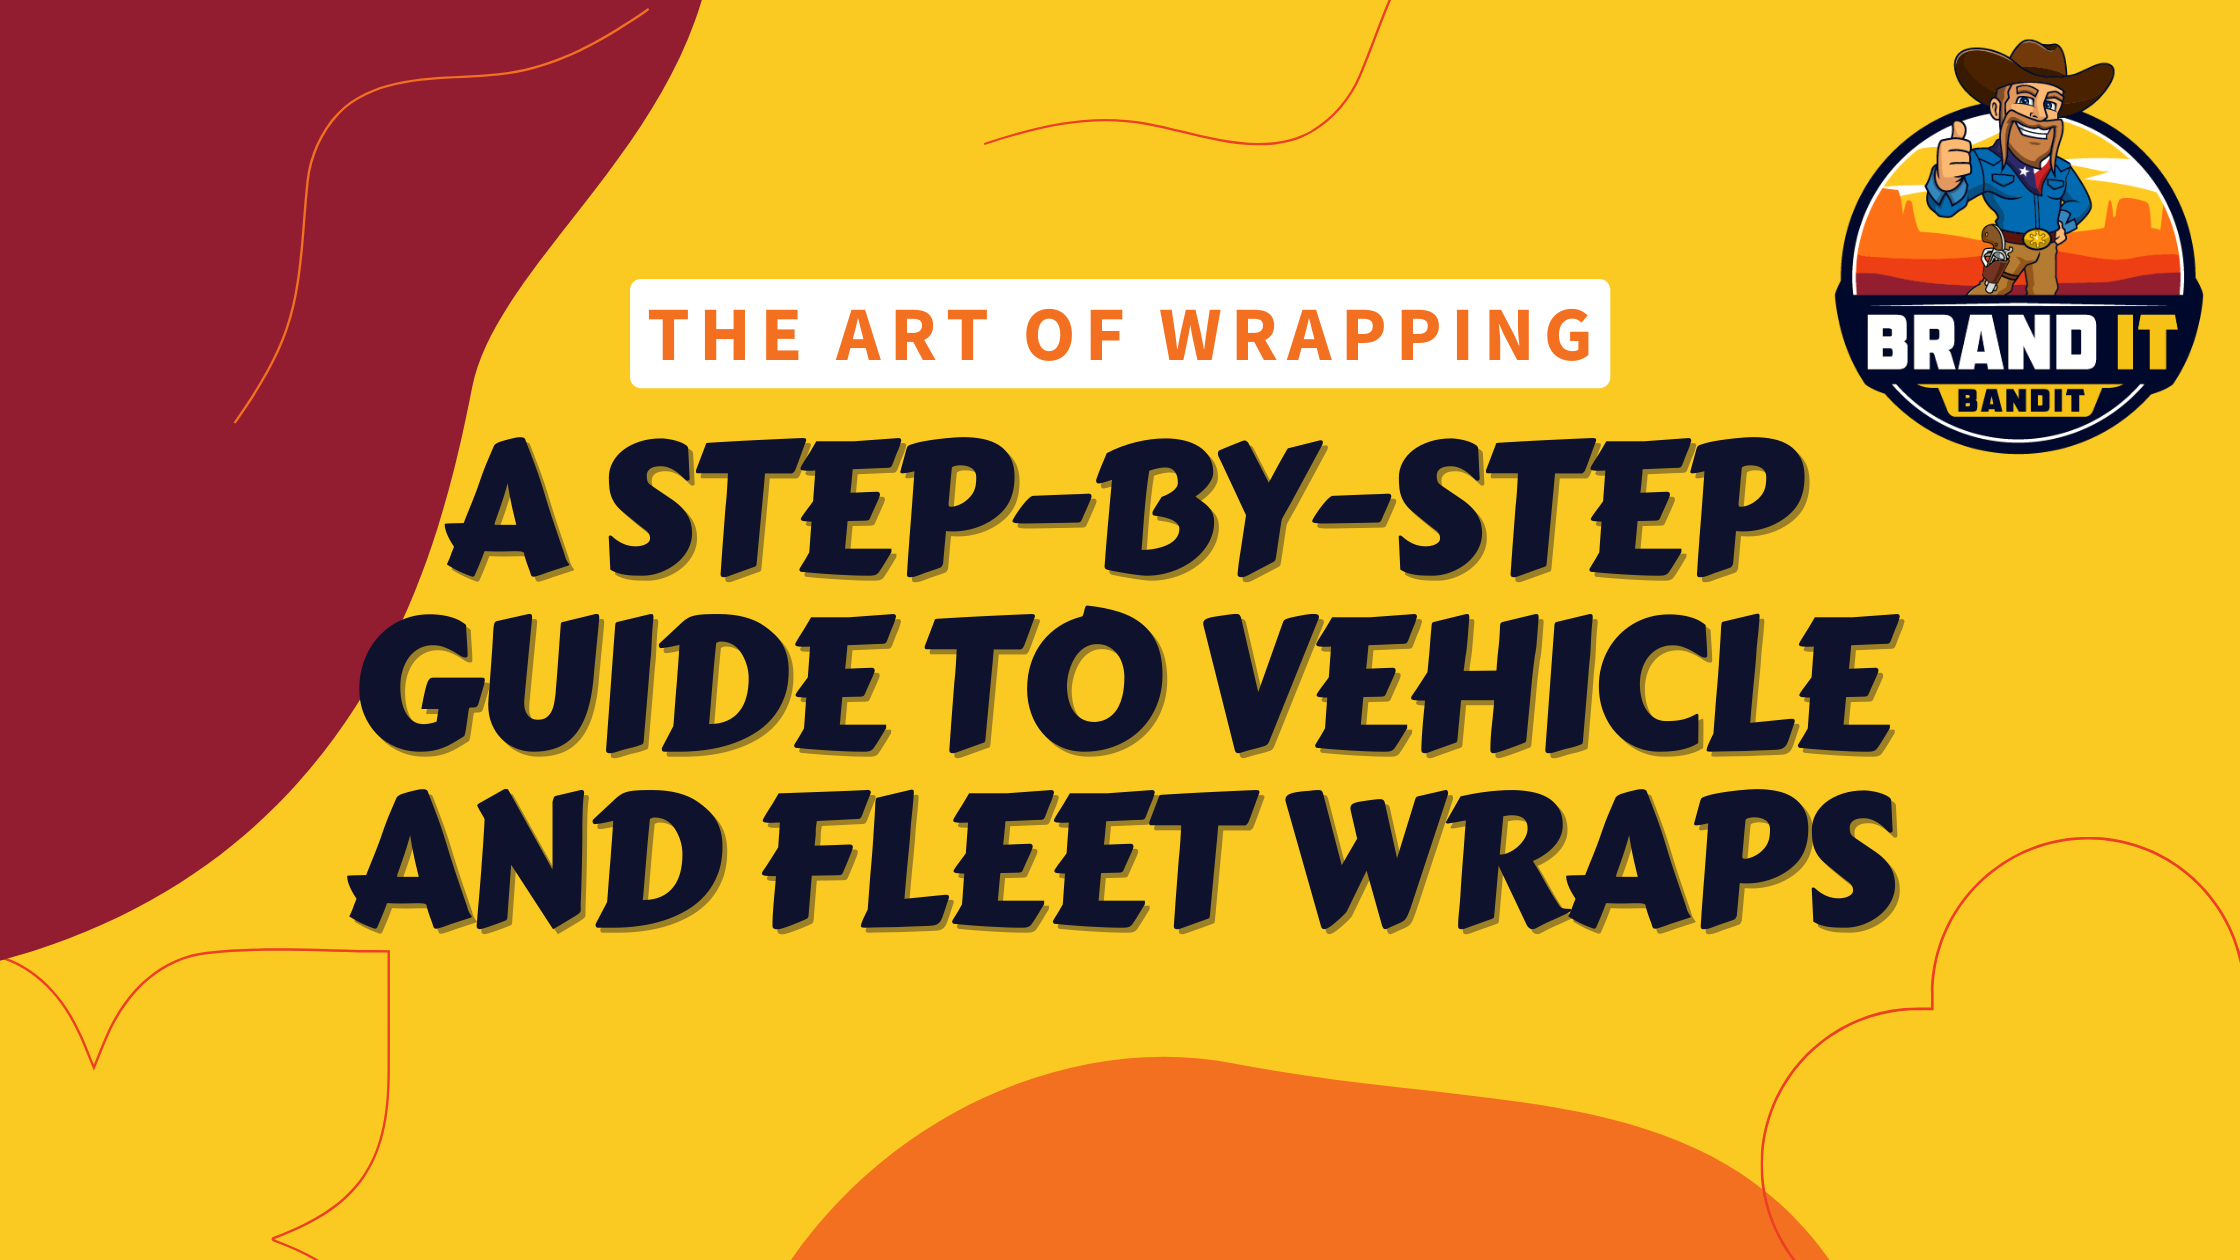 The Art of Wrapping: A Step-by-Step Guide to Vehicle and Fleet Wraps